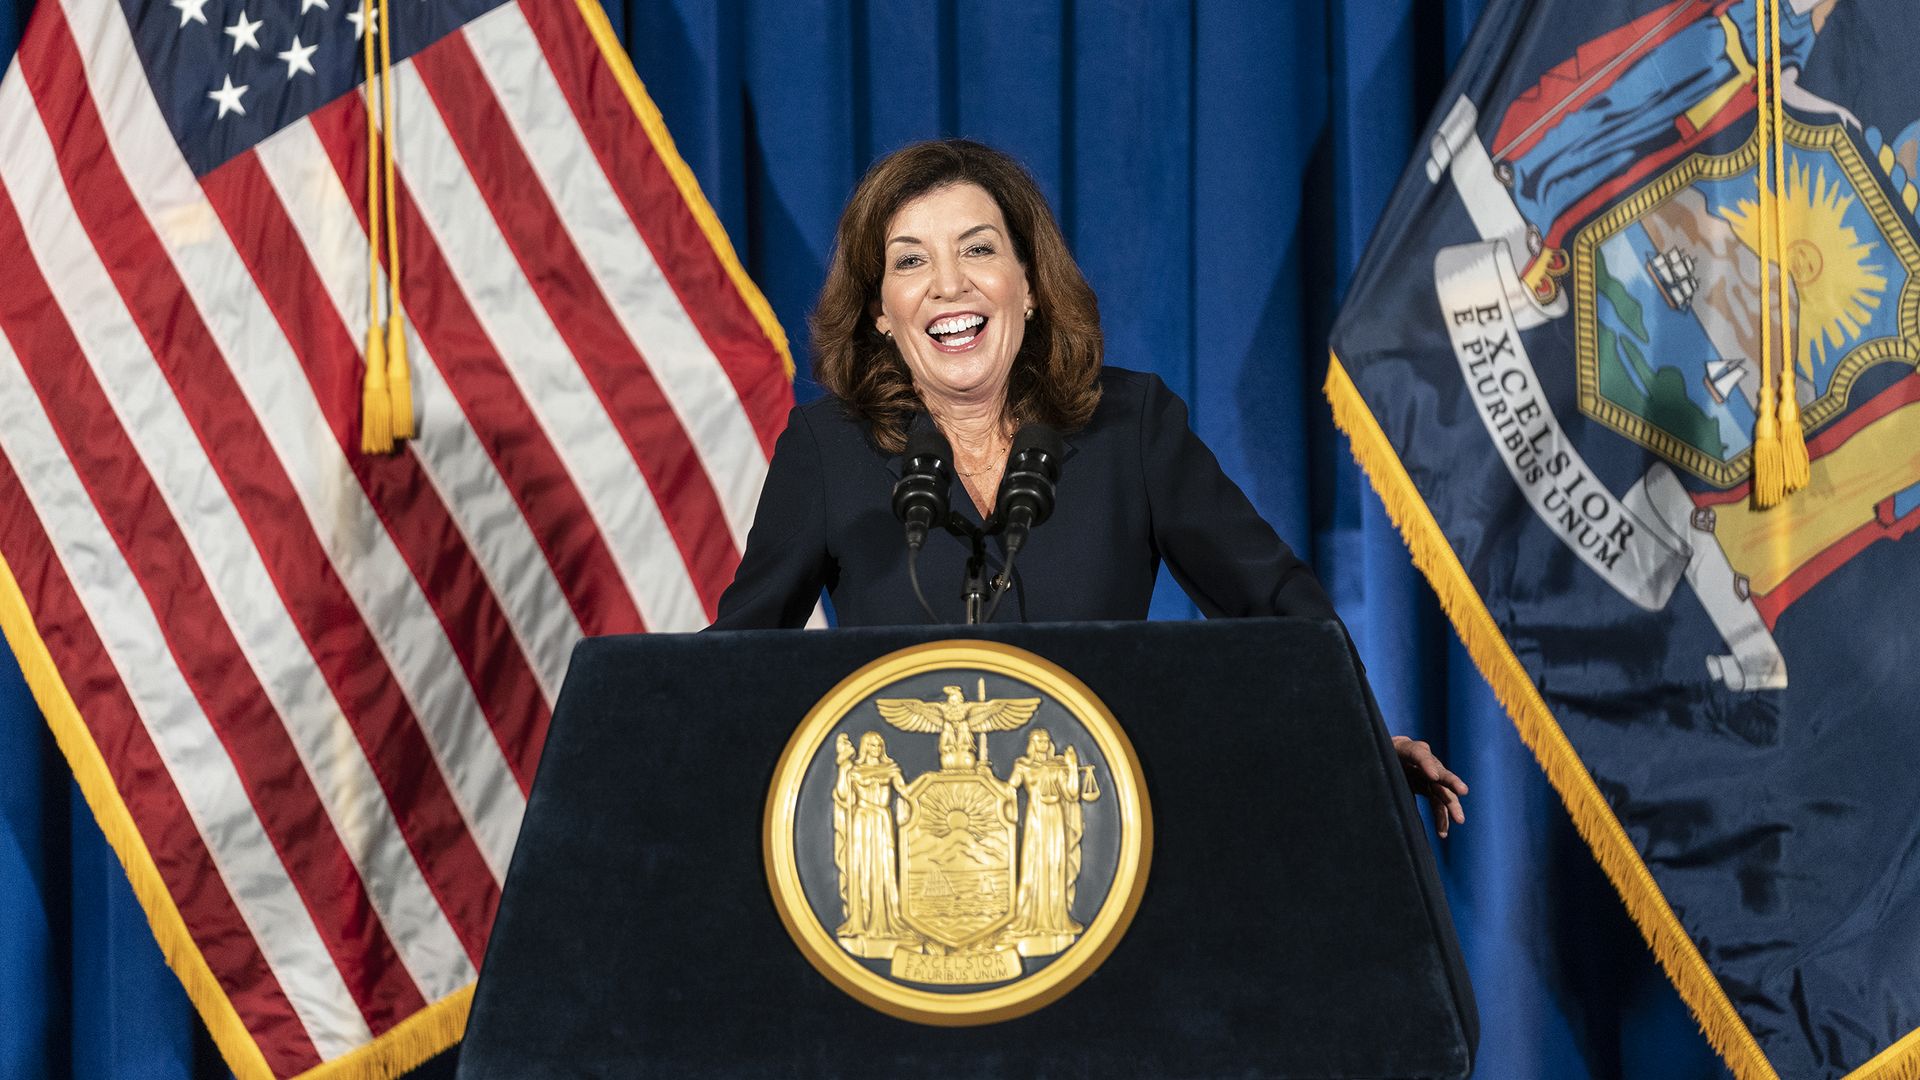 Lieutenant Governor Kathy Hochul addresses the people of New York at the State Capitol Building